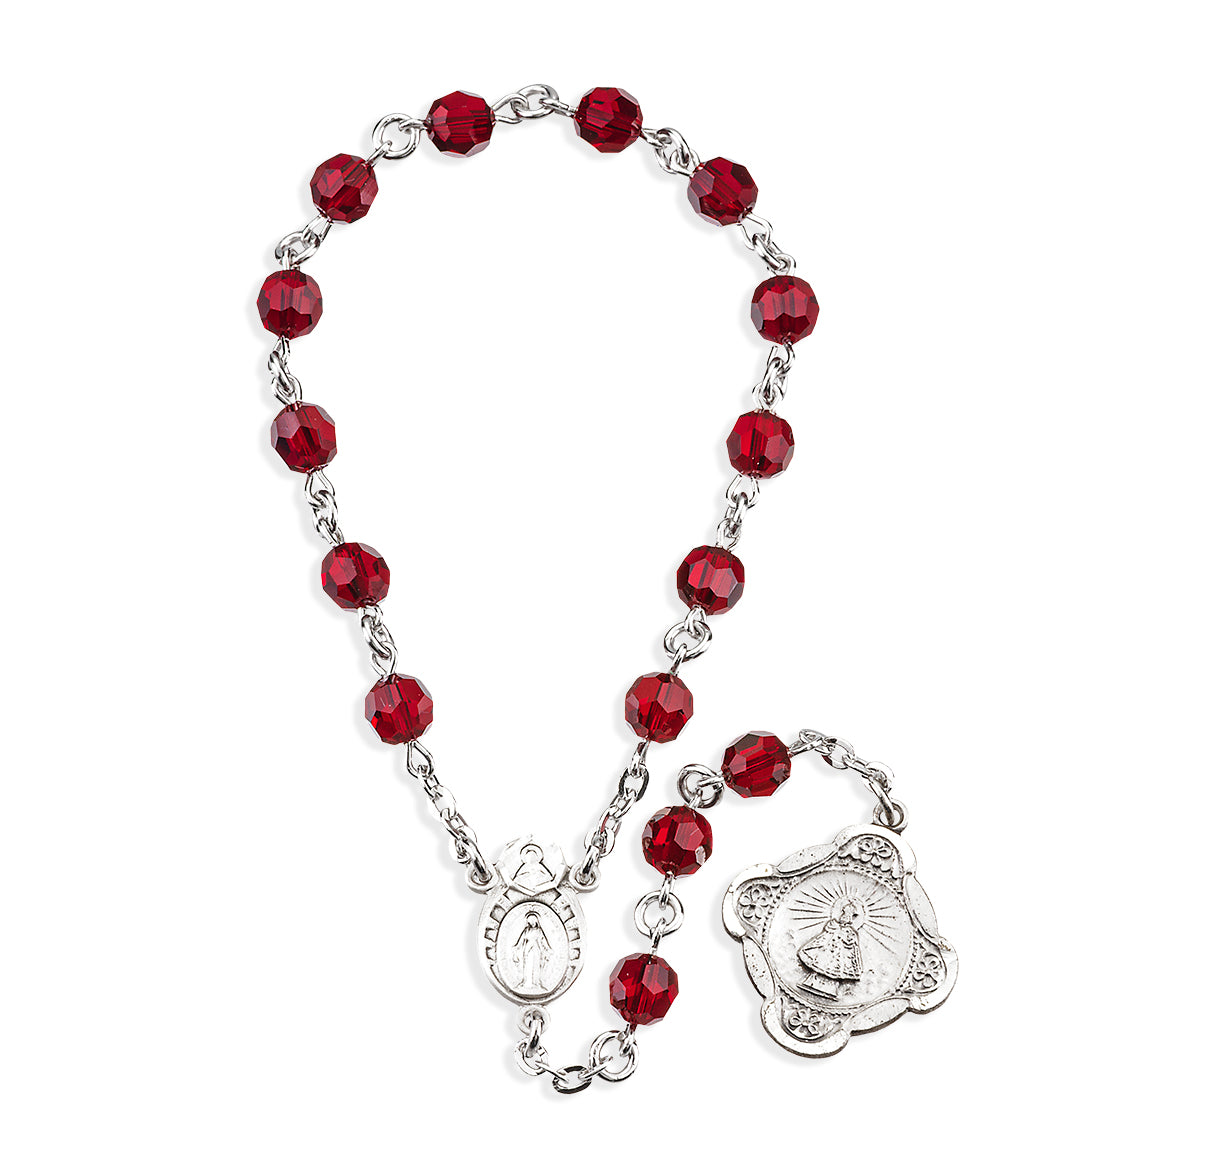 Sterling Silver Infant Jesus of Prague Chaplet with Miraculous Centerpiece made with Finest Crystal 6mm Ruby Beads